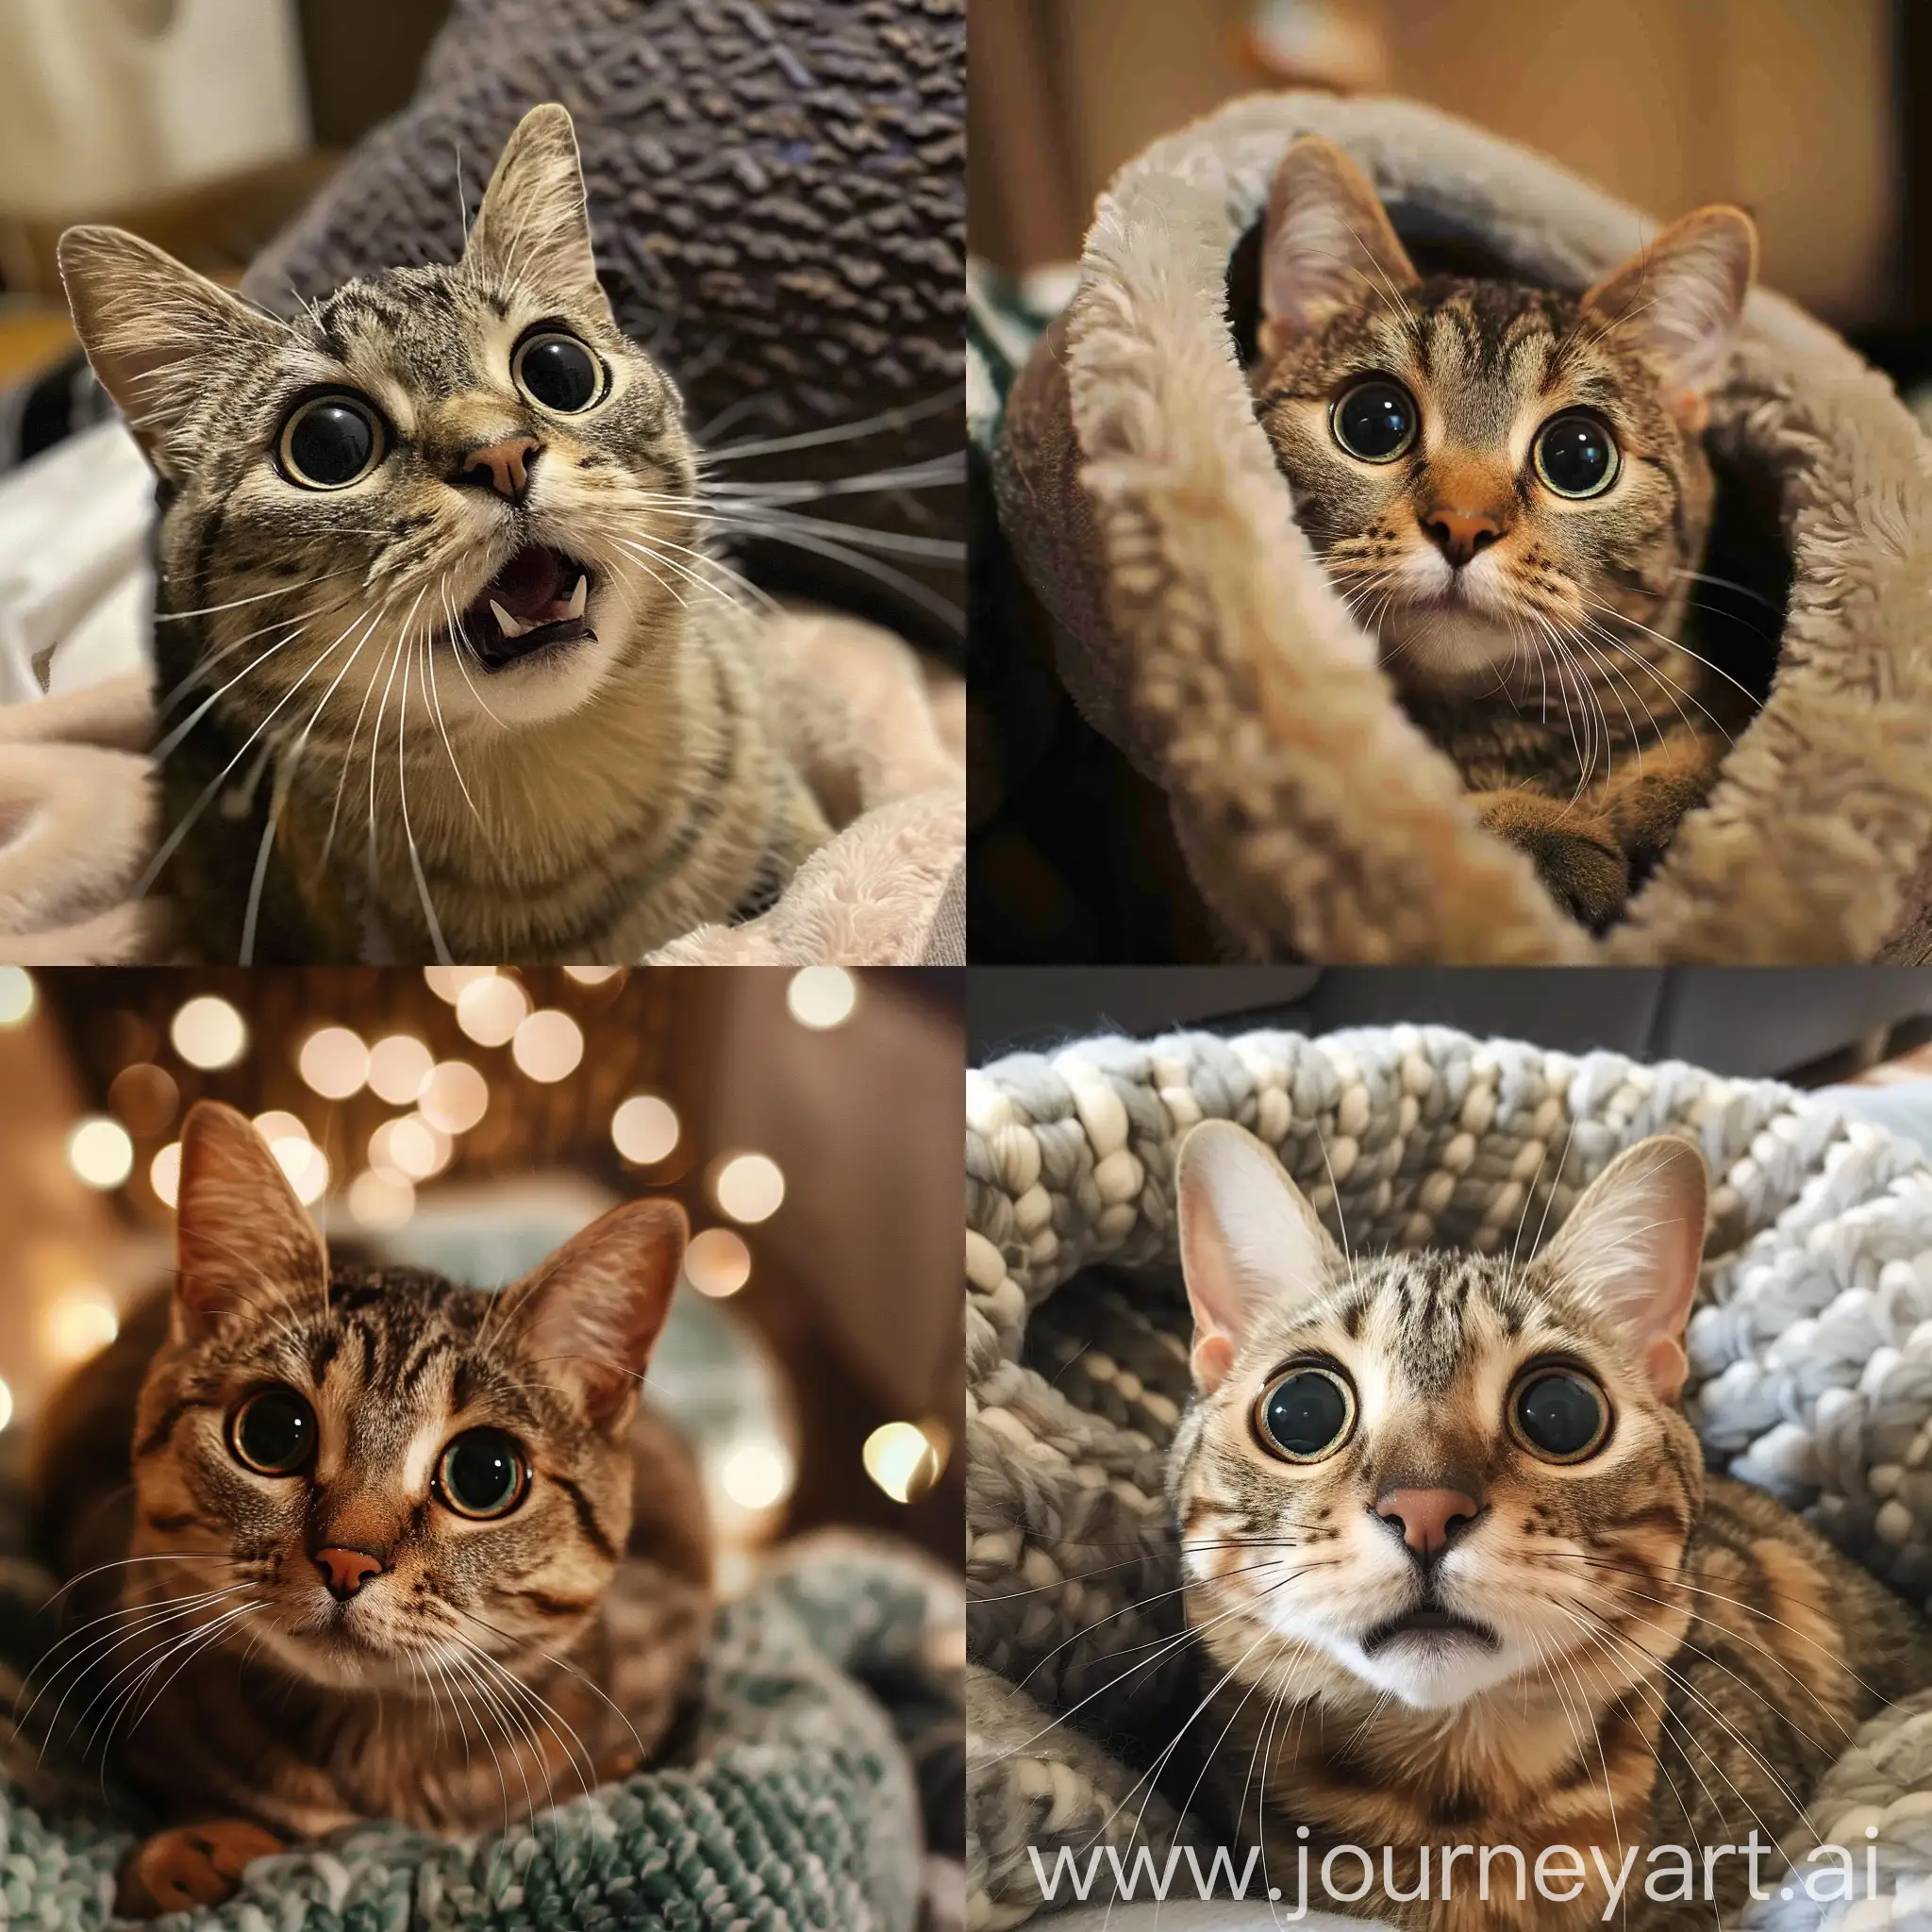 Adorable-Cat-Meowing-in-a-Cozy-Home